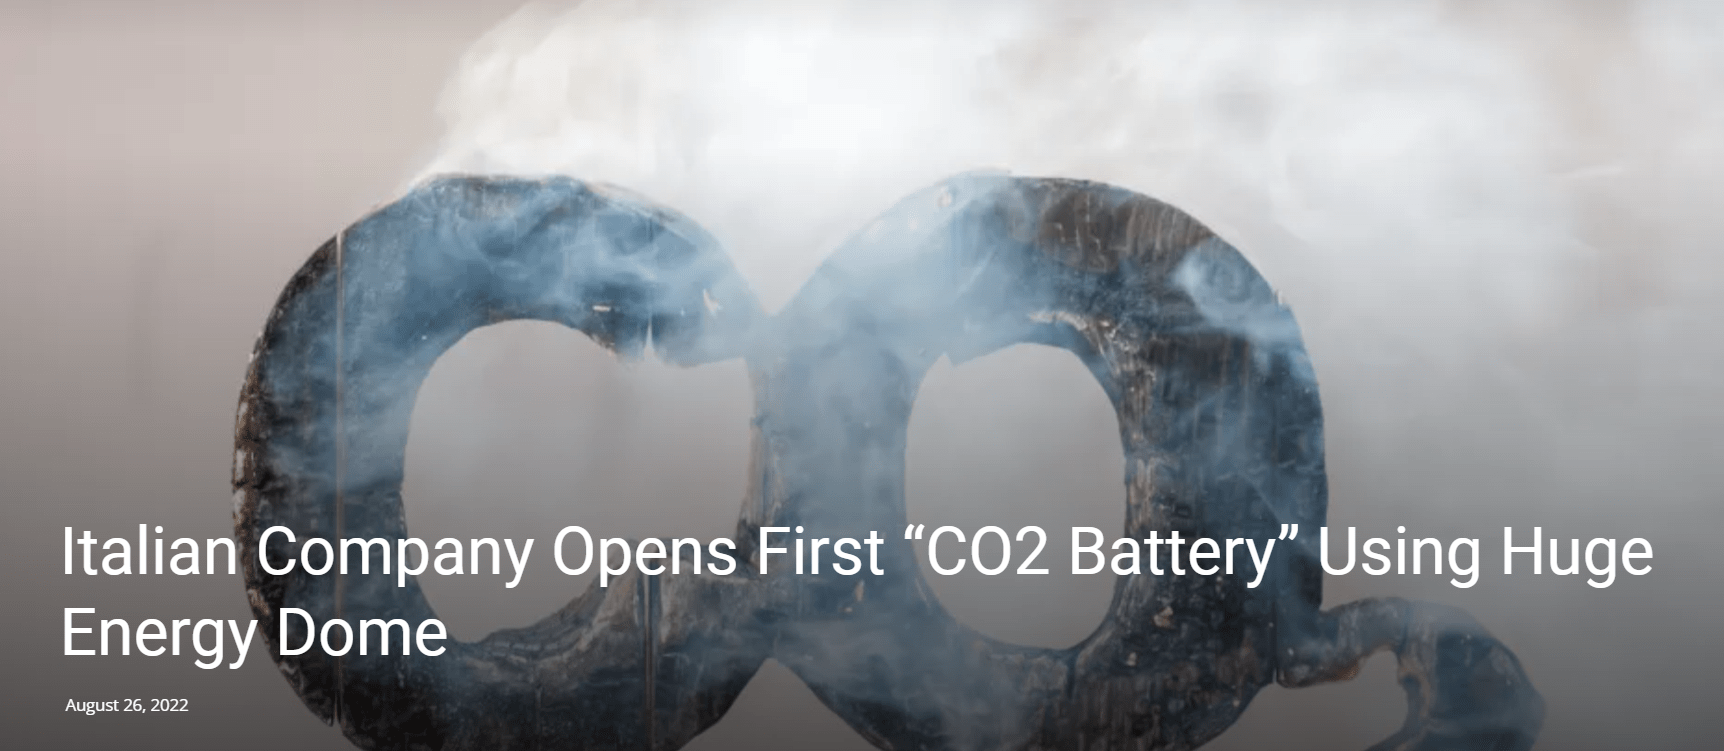 Capture5 The Top 5 Happy Eco News Stories for September 5, 2022